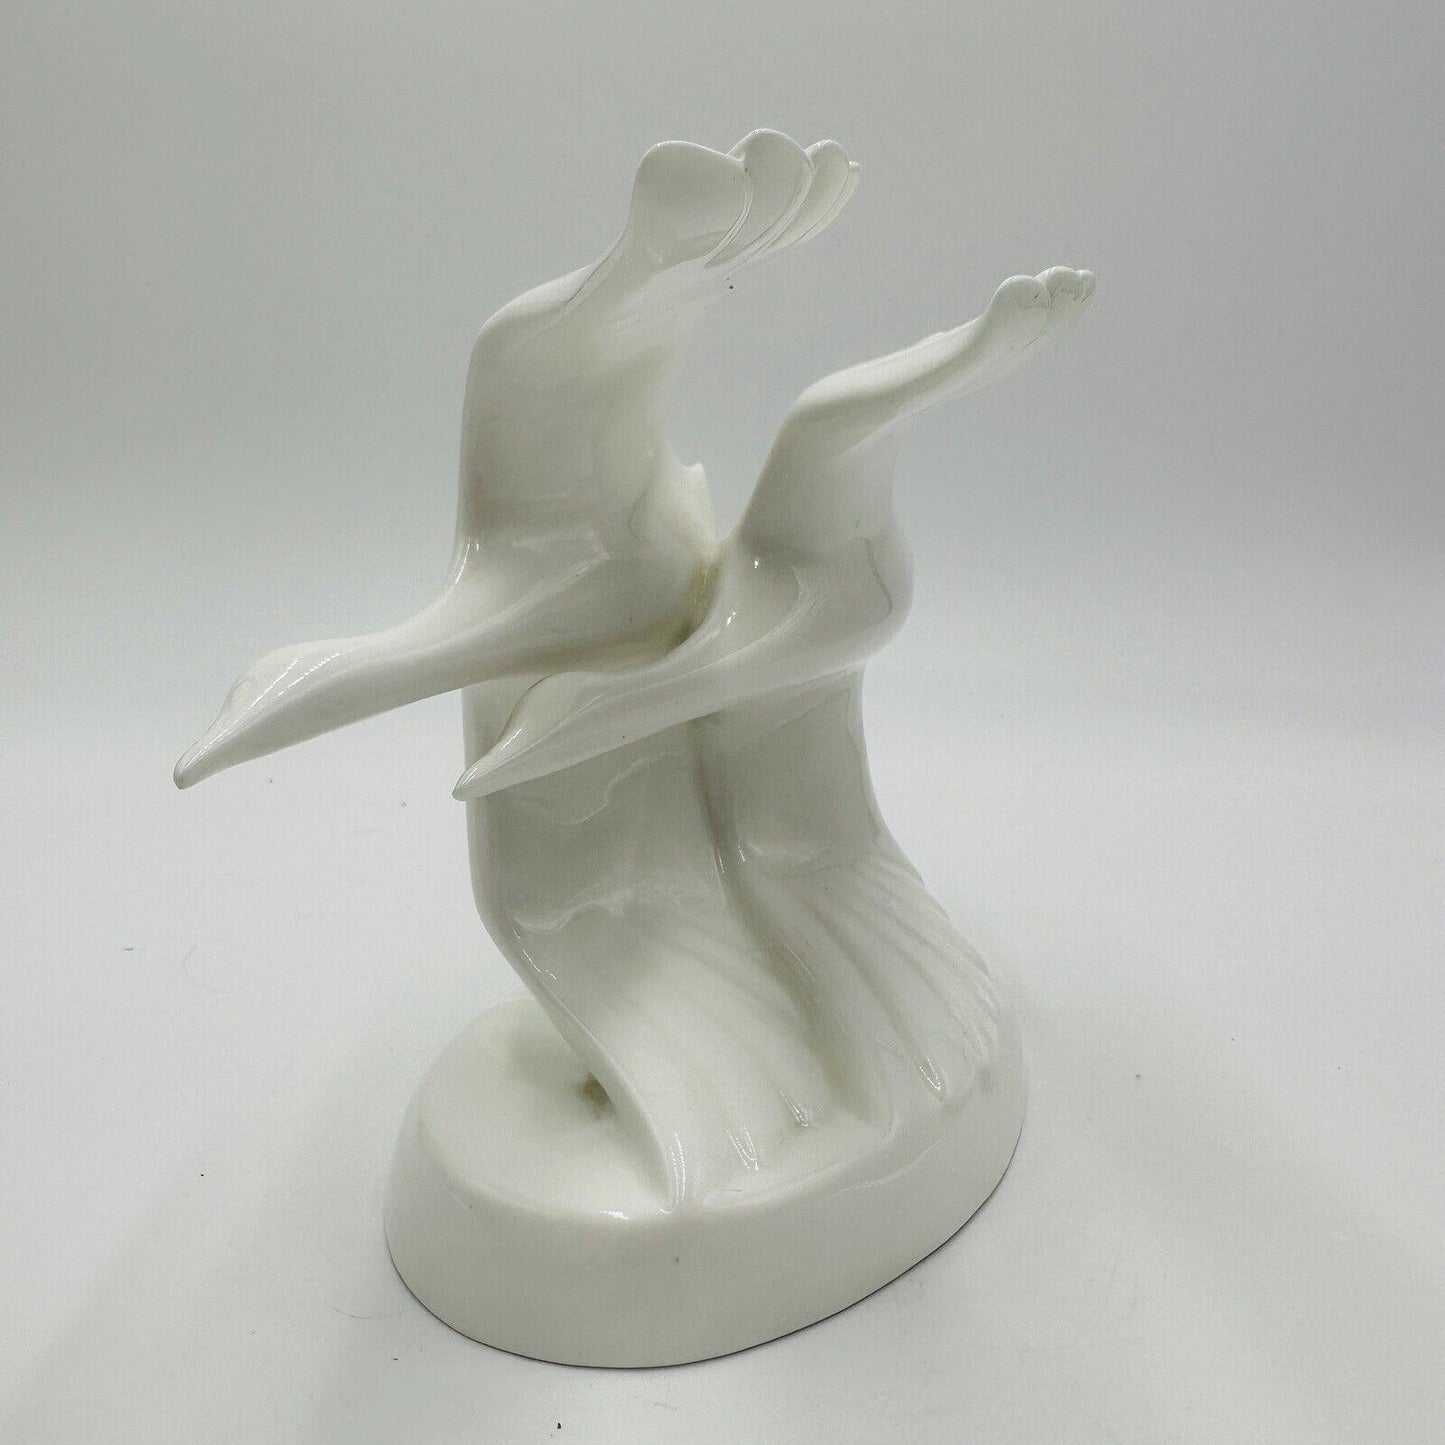 Royal Doulton Figurines "Going Home" Flying Geese 1982 #HN3527 White Glossy